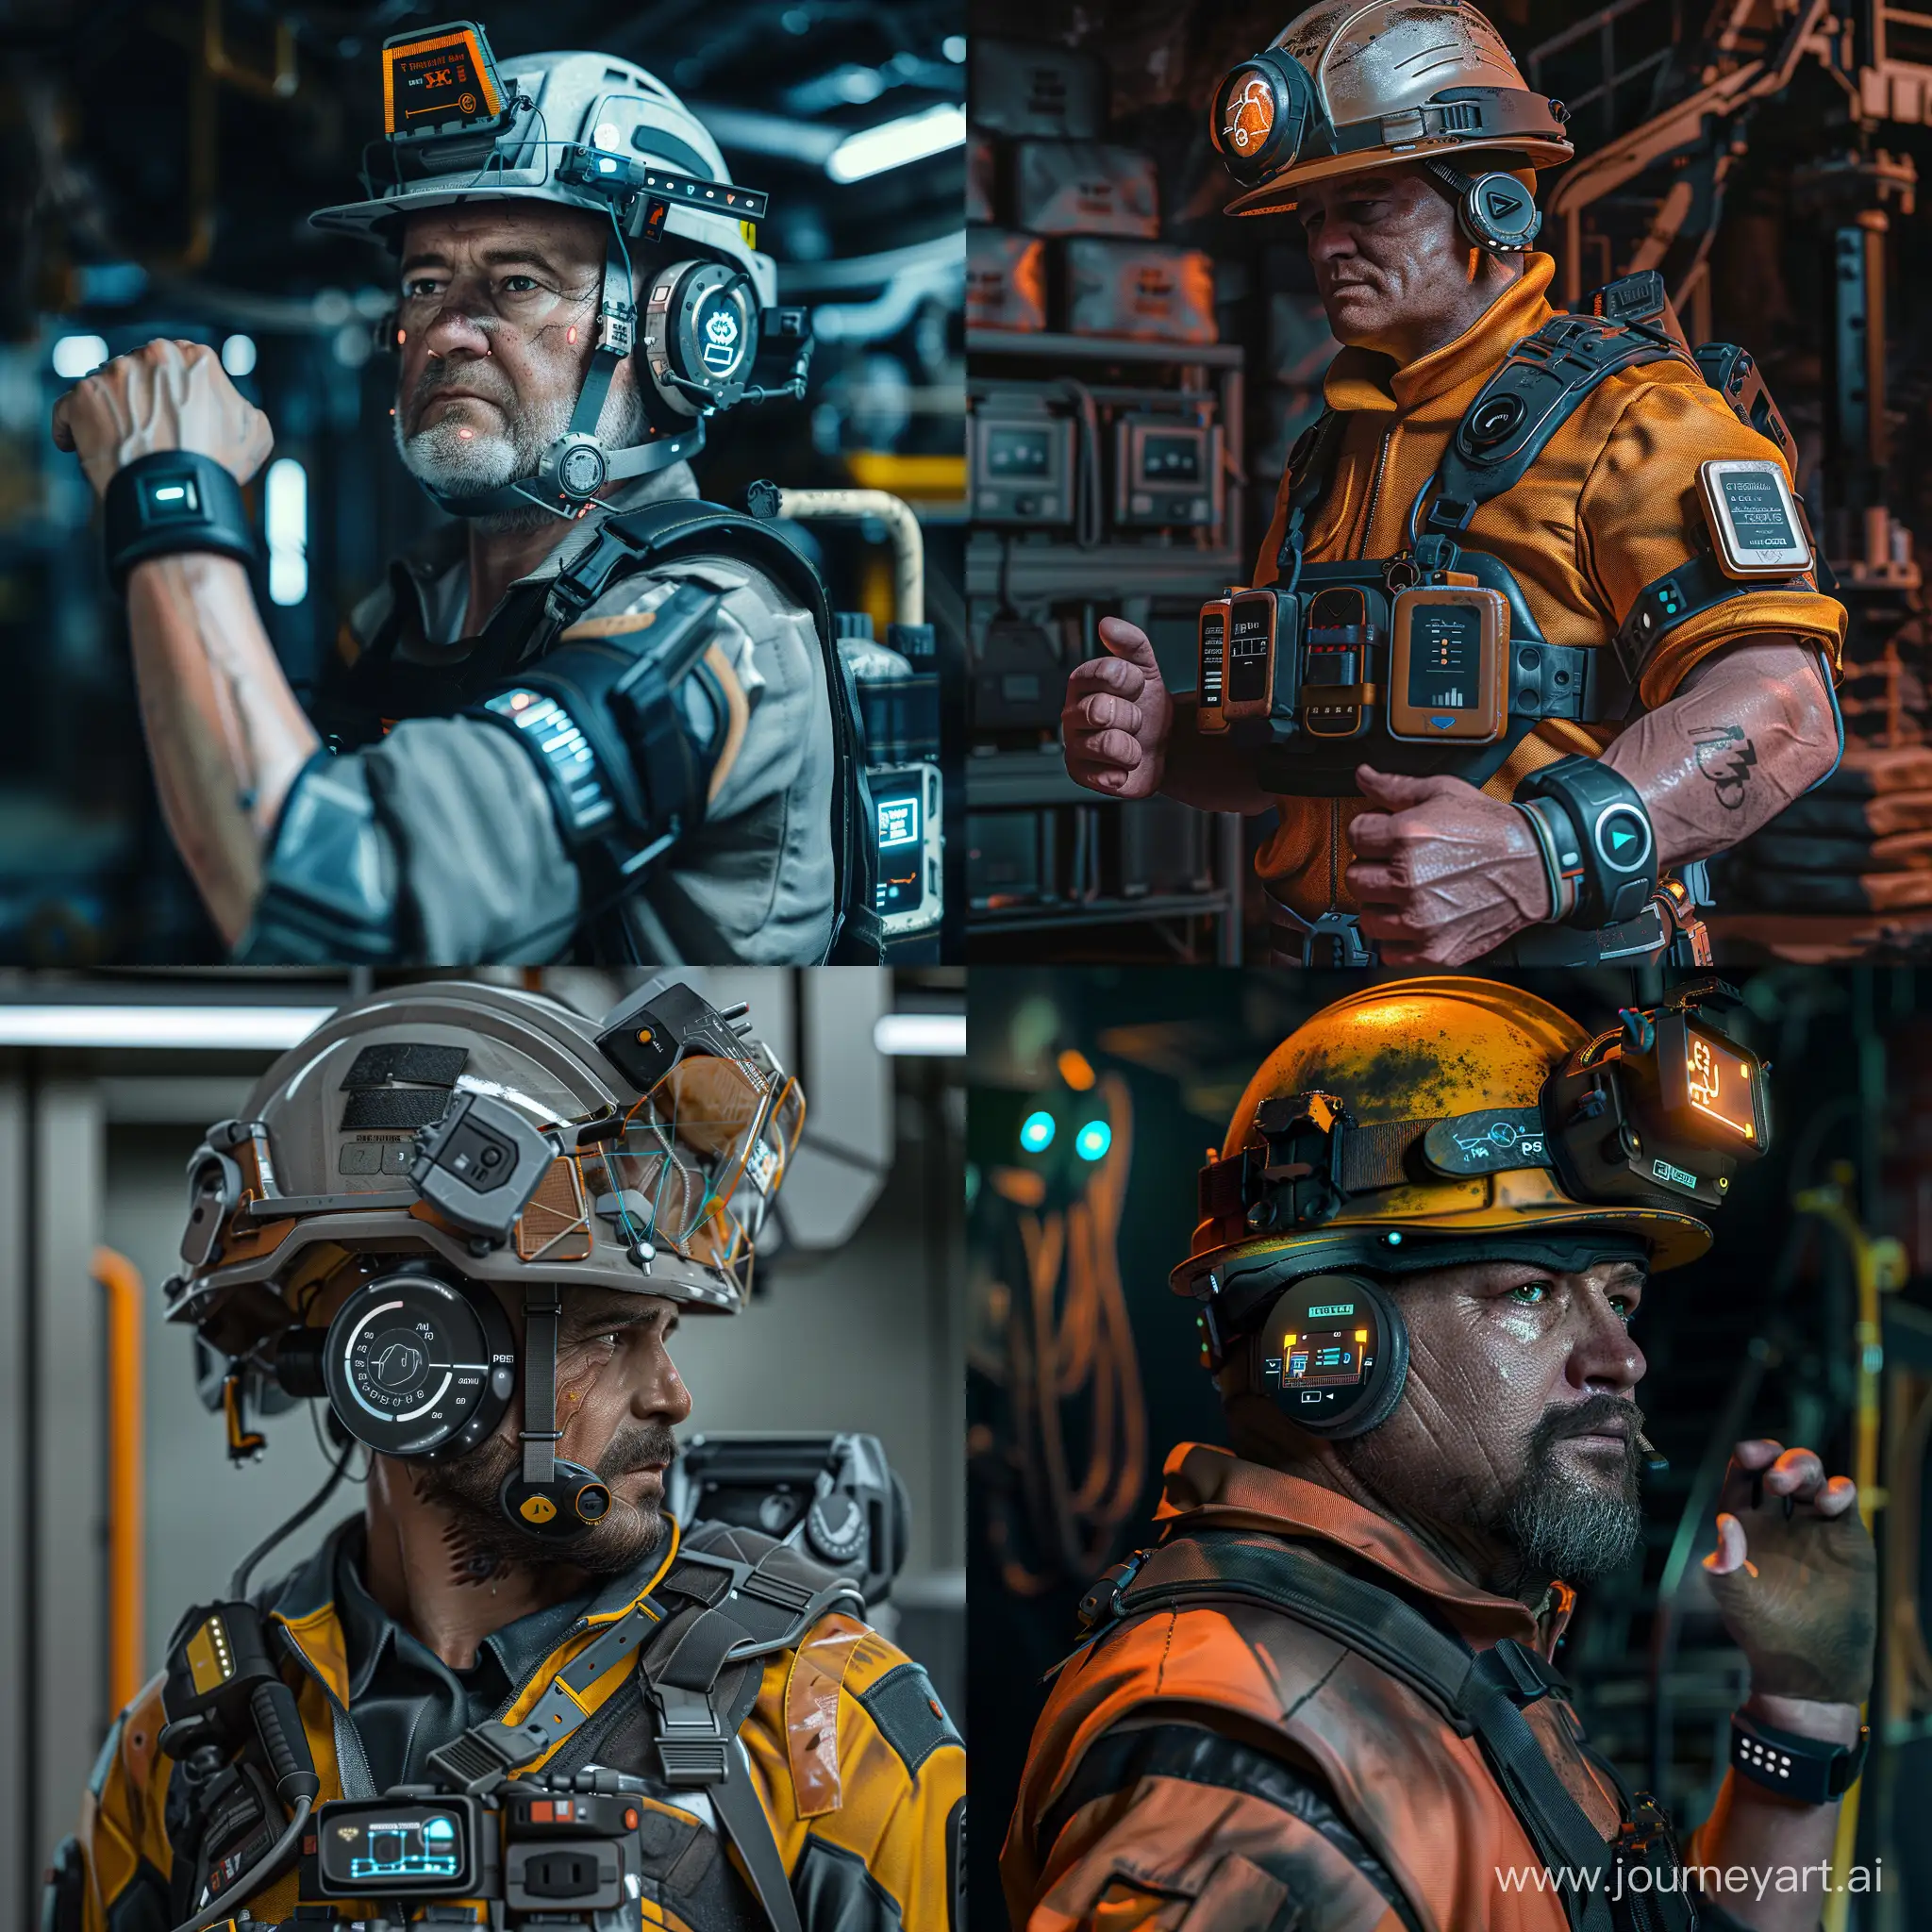 Advanced-Safety-Gear-for-Underground-Miners-Smart-Hardhat-and-Wristband